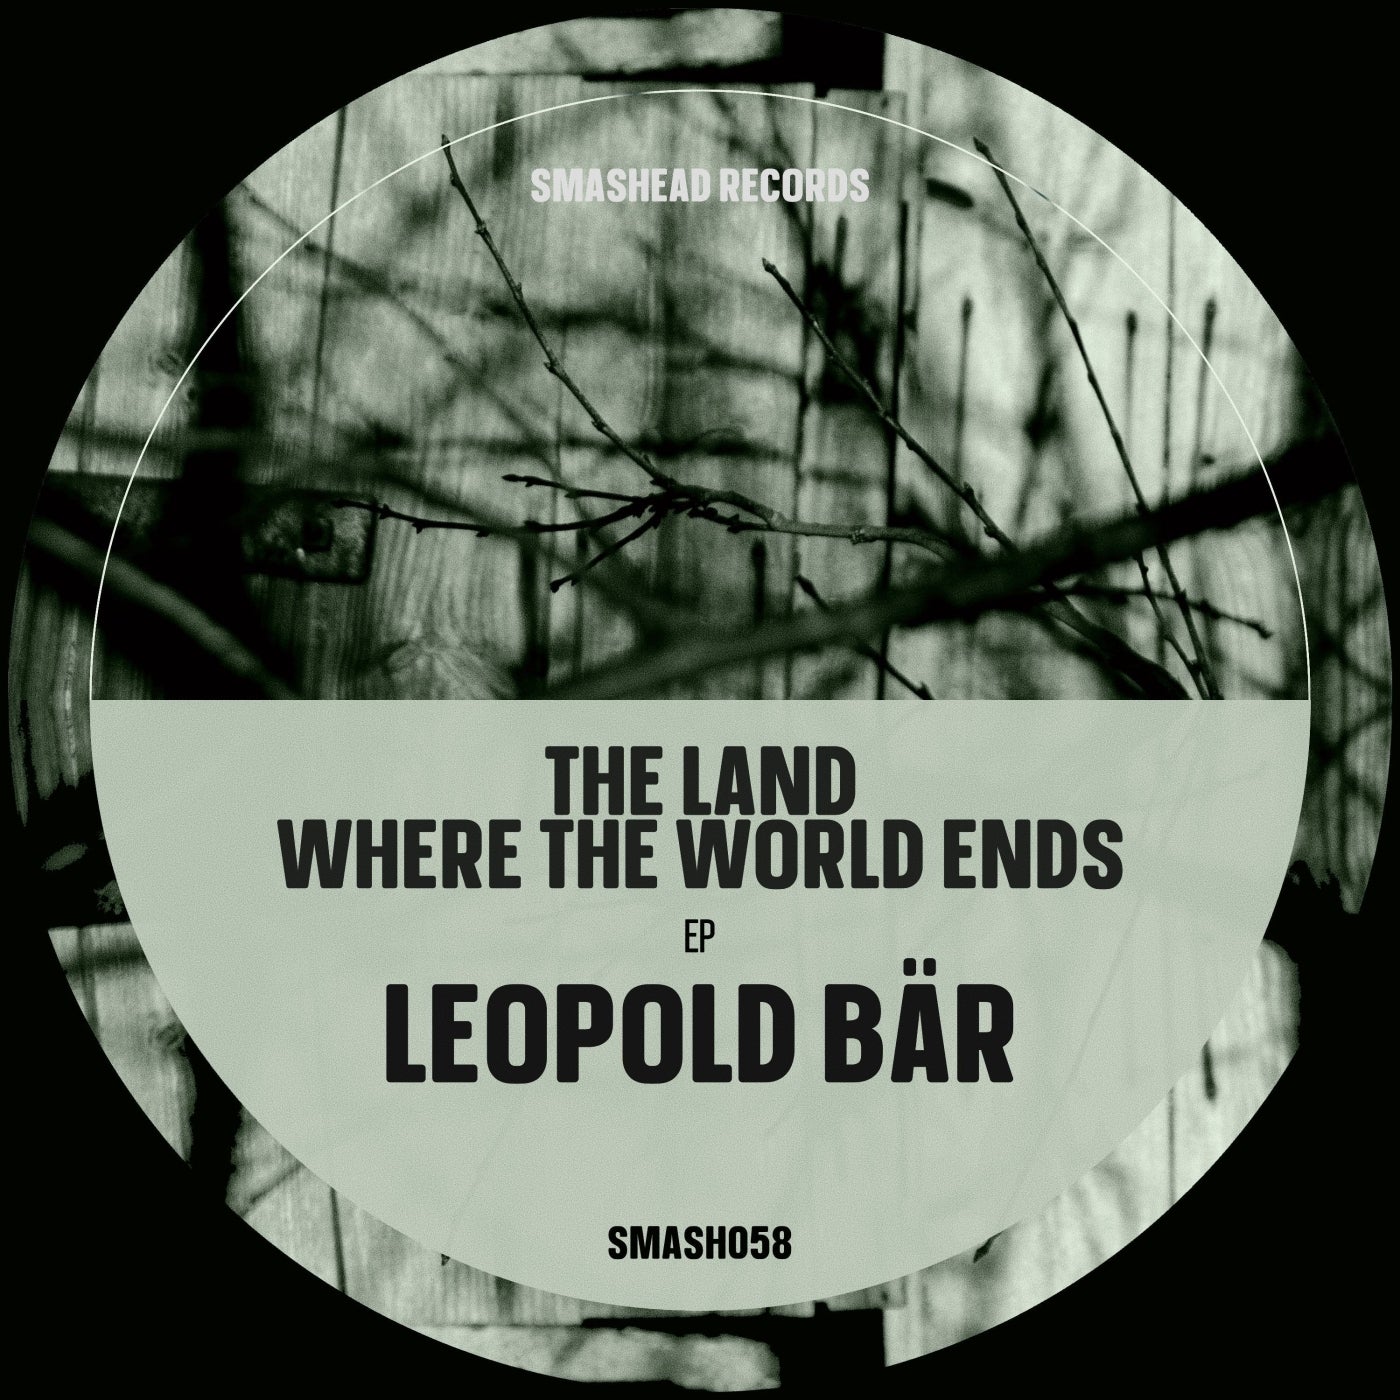 The Land Where the World Ends